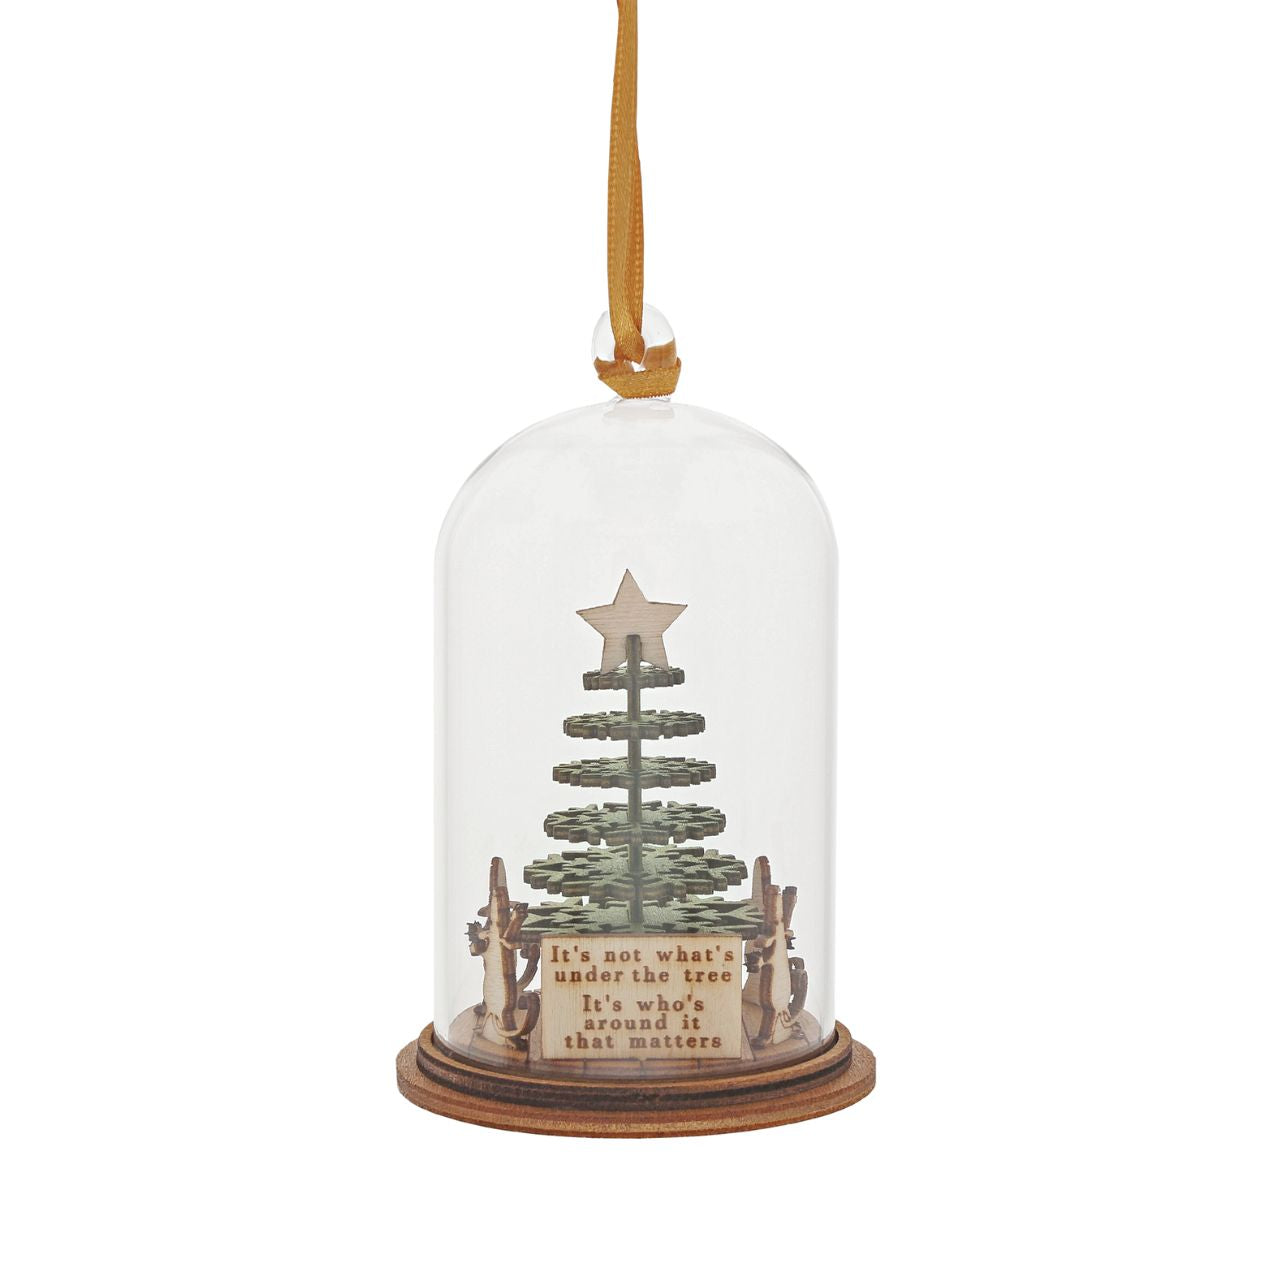 Together at Christmas Hanging Ornament  The Spirit of Christmas. A collection of delightful wooden decorations that capture the essence of that special time of year. This glass dome, Christmas decoration encases a Christmas tree, adorned with a bunch of friendly mice, a wooden star and ribbon to help hang off your Christmas tree.